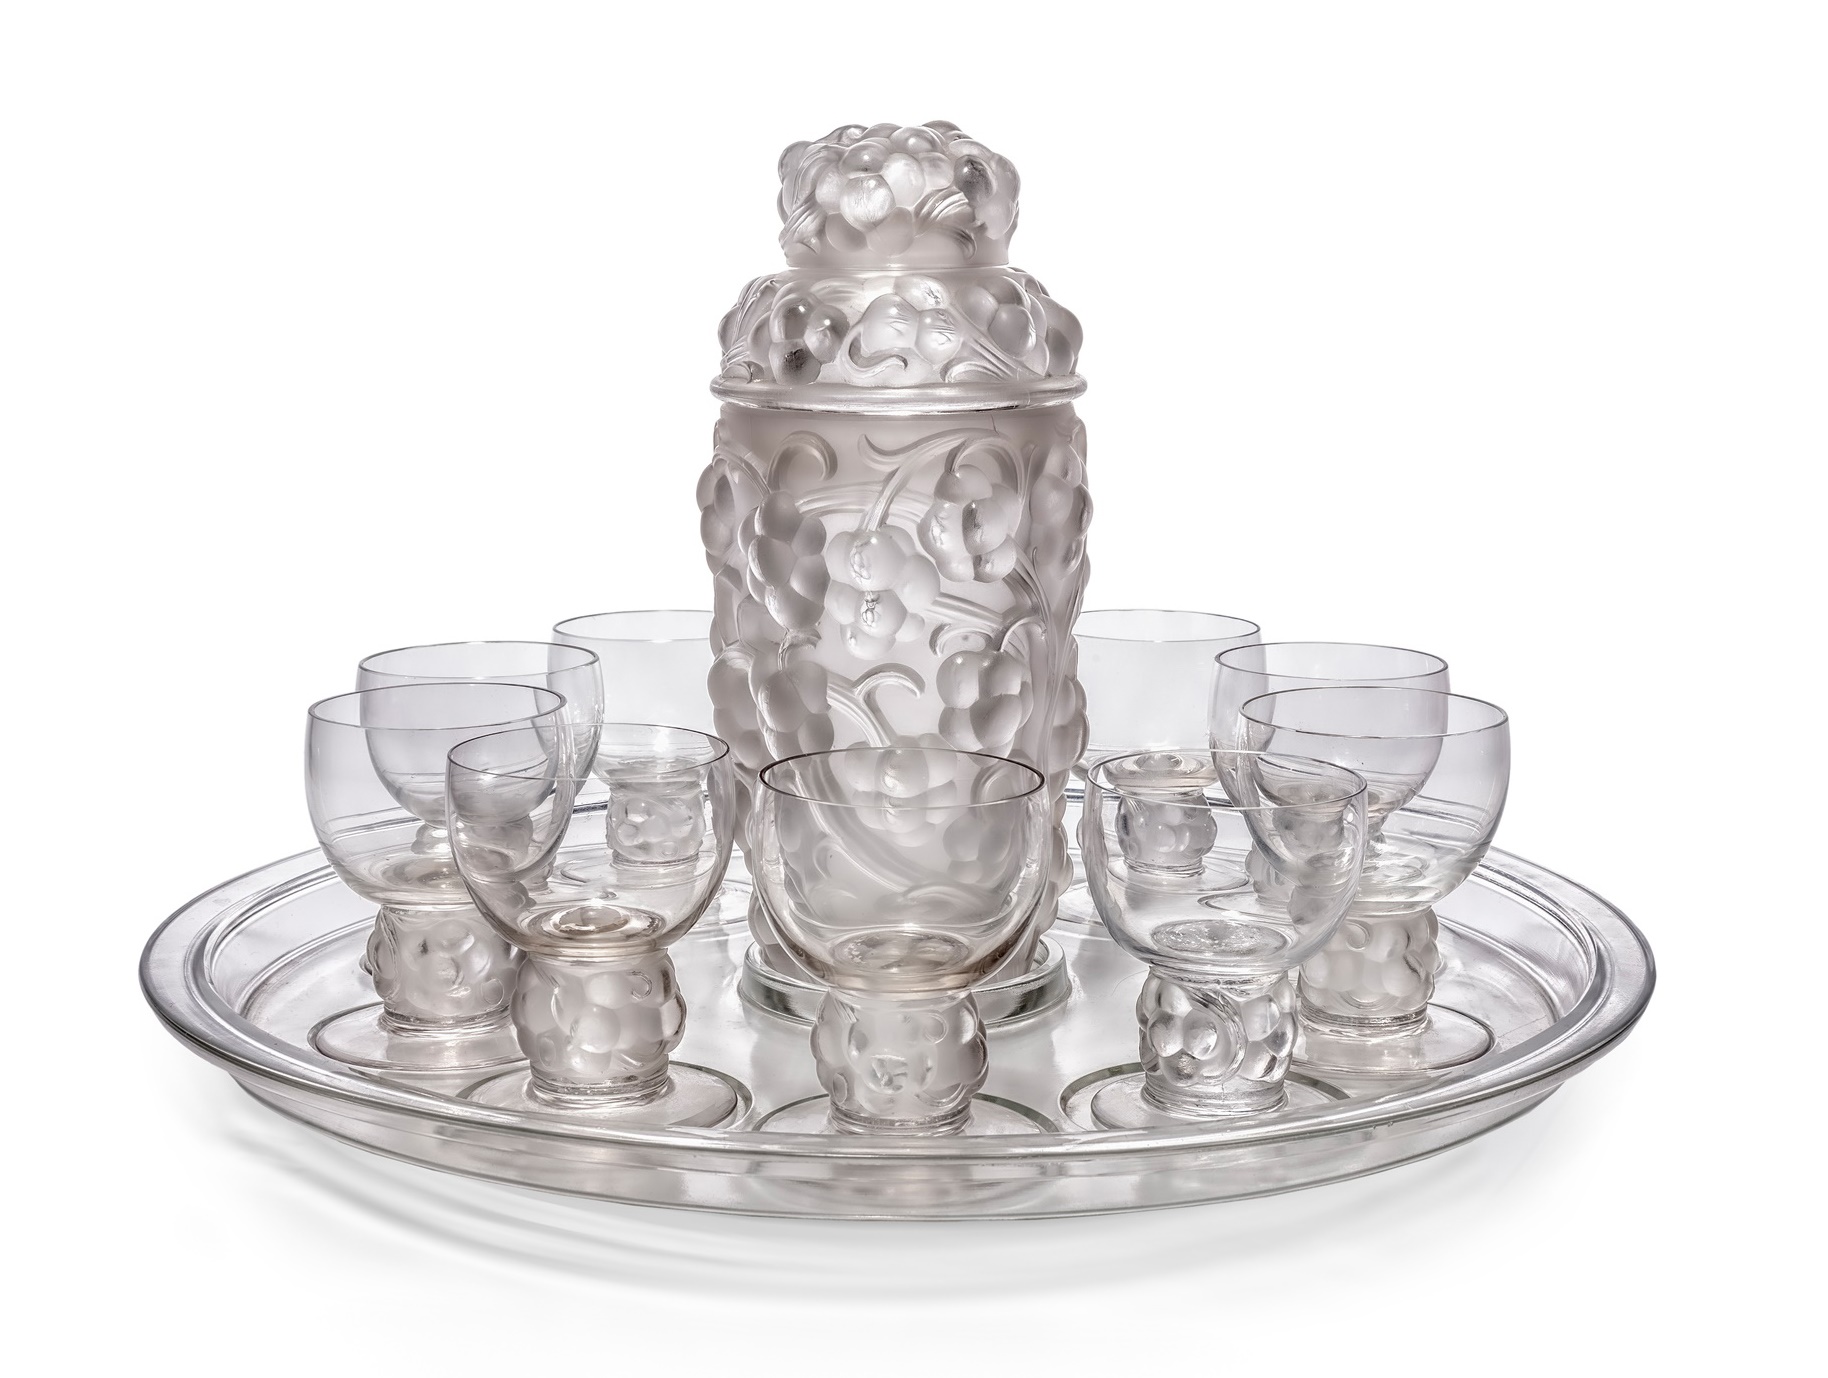 RENÉ LALIQUE (FRENCH 1860-1945) | THOMEREY COCKTAIL SET FOR TEN | £3,000 - £5,000 + fees